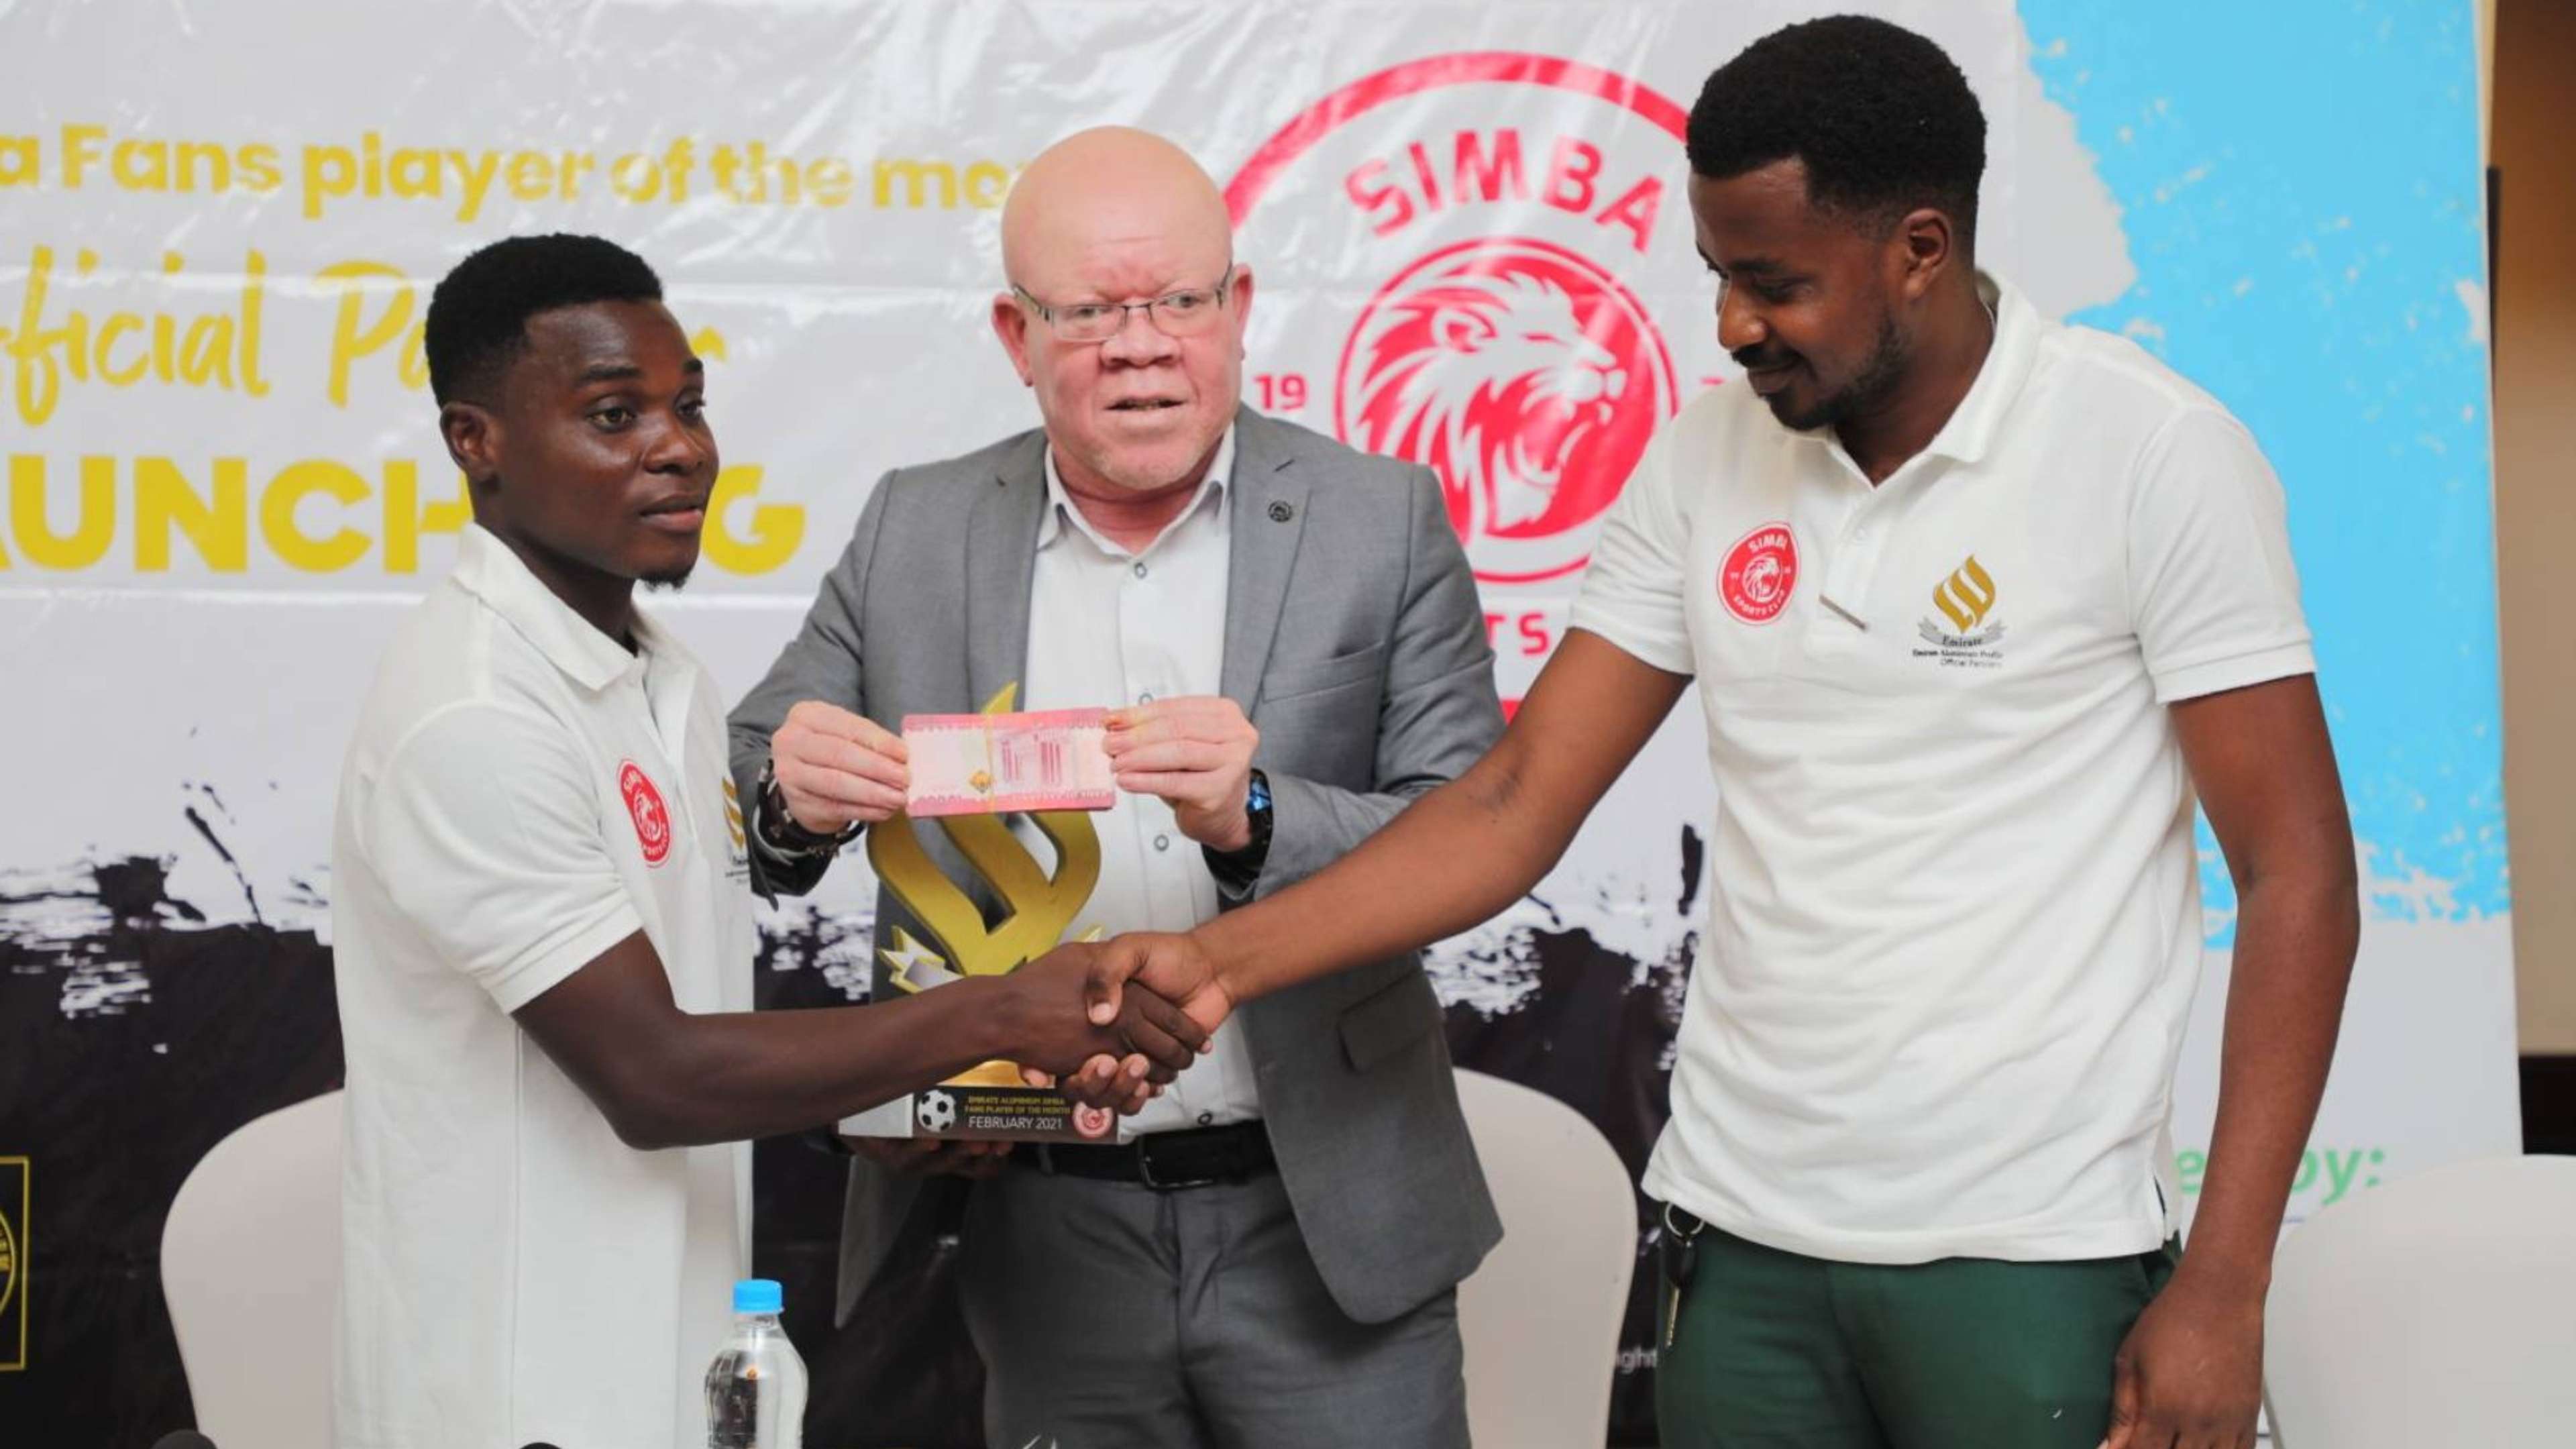 Luis Miquissone named best Simba SC player for February.